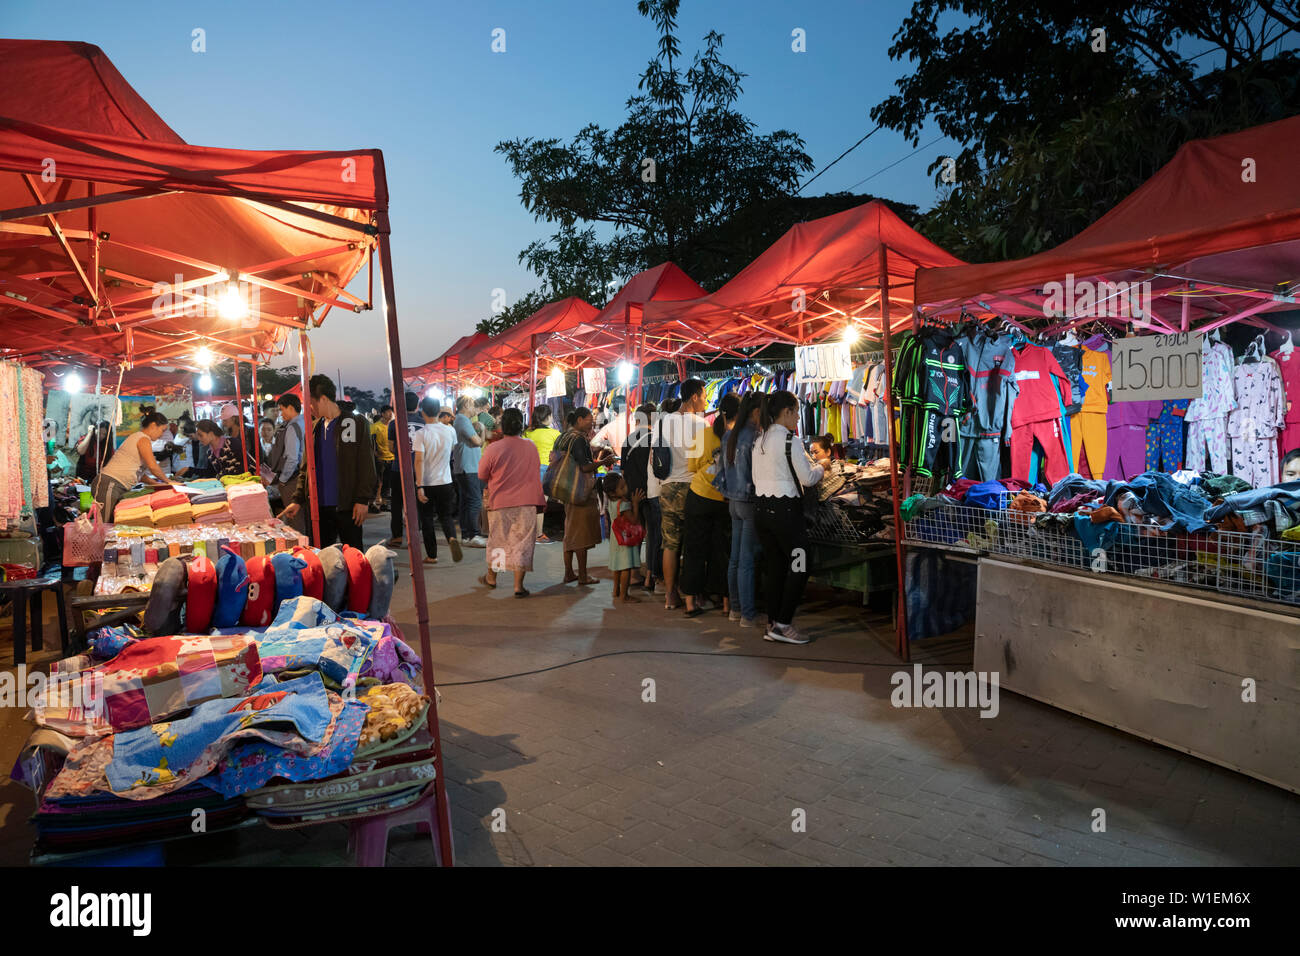 Night market at the Chao Anouvong Park on Th Fa Ngoum next to the Mekong river, Vientiane, Laos, Indochina, Southeast Asia, Asia Stock Photo